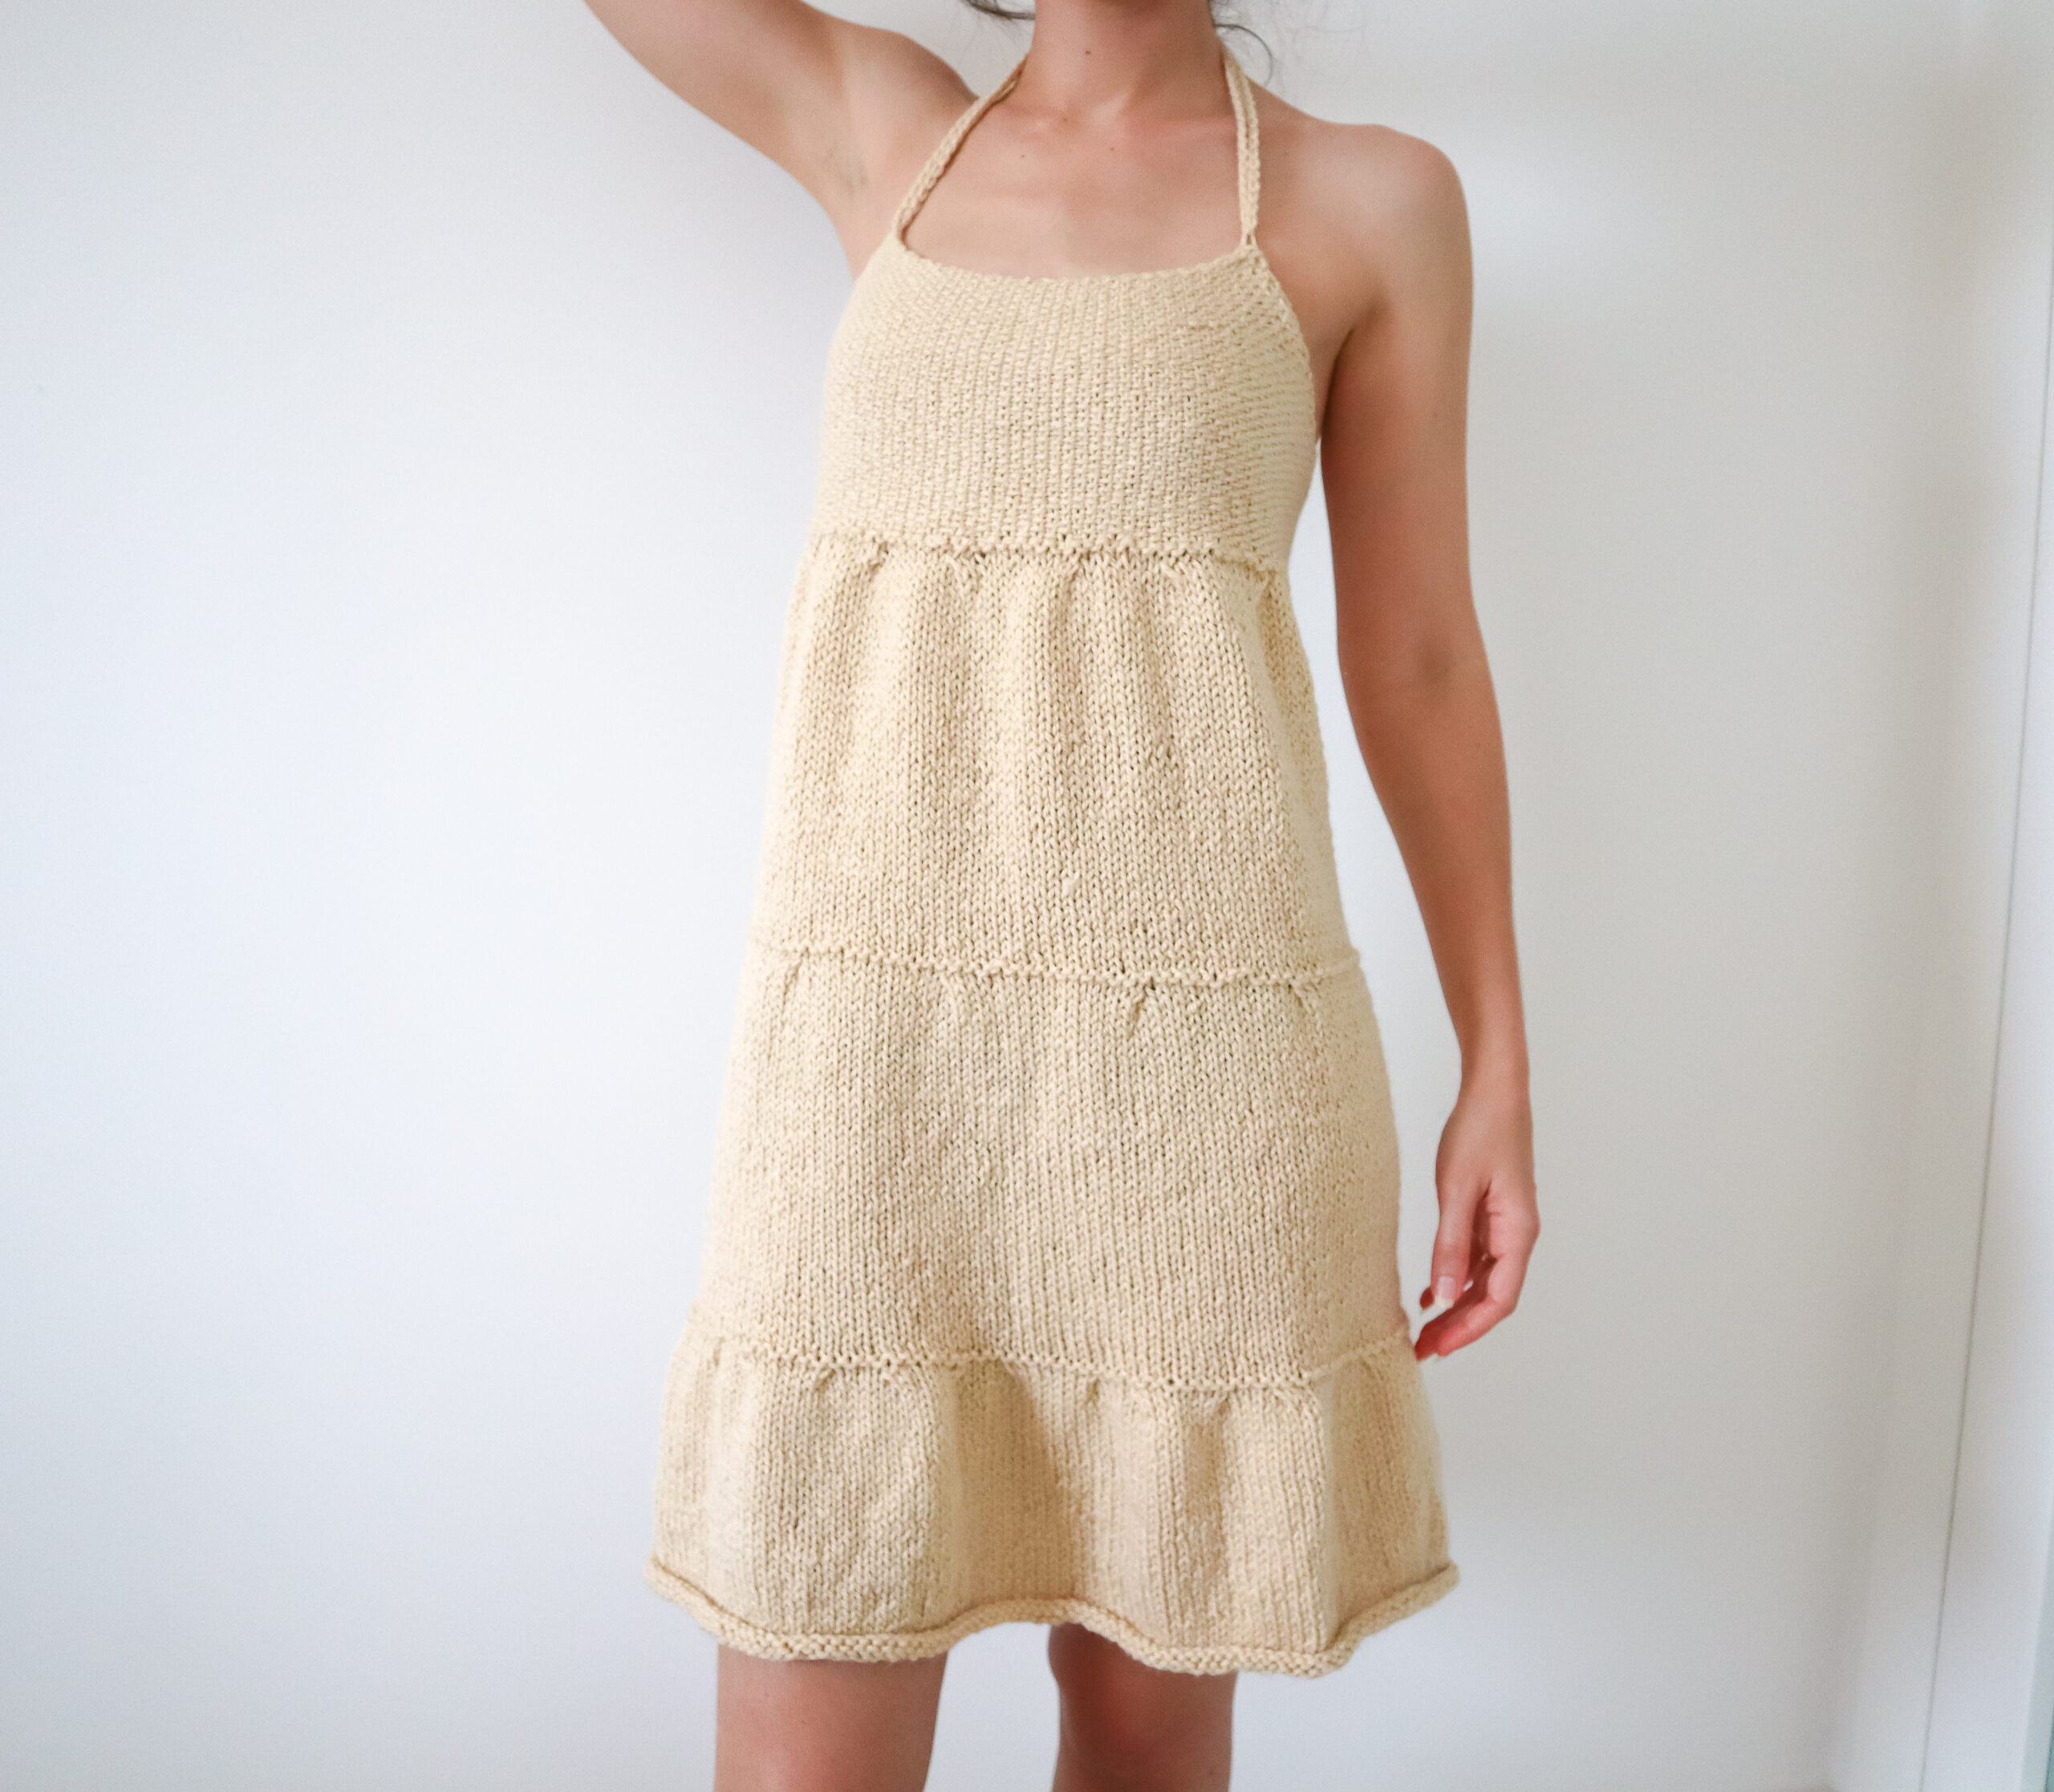 Three Tiered Dress – Knit Cover Up Pattern – The Snugglery